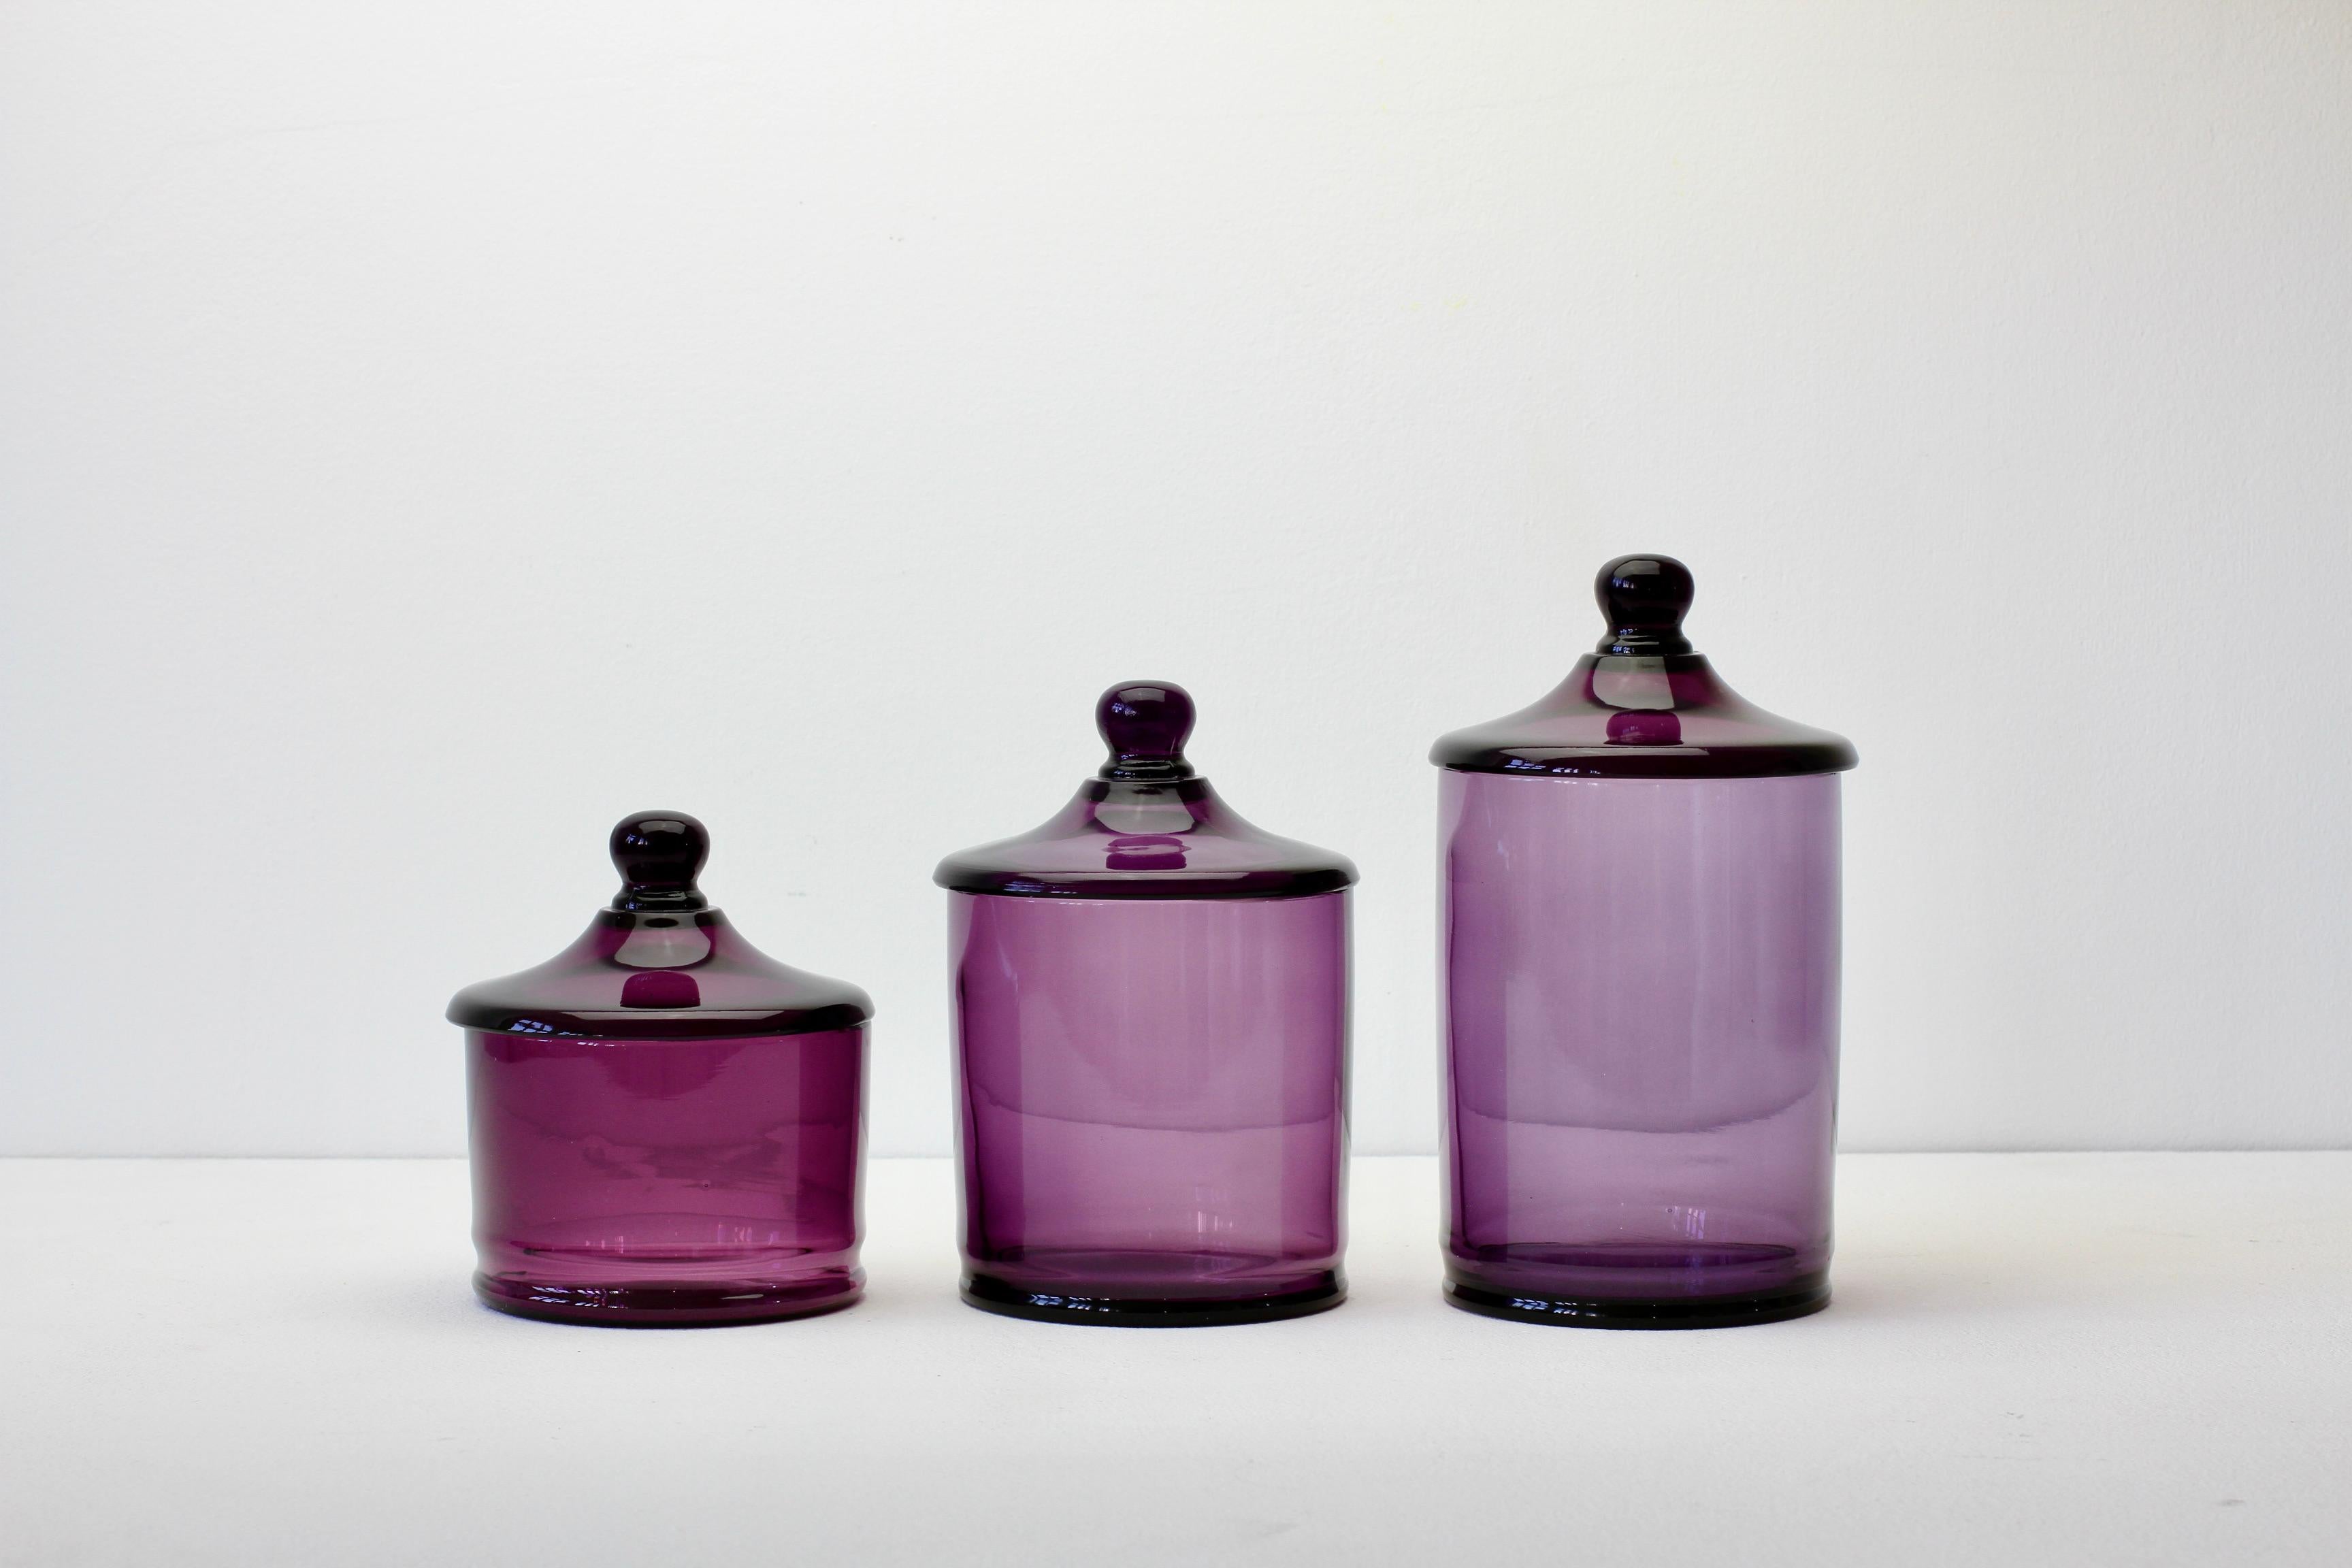 Rare set (set number 2) of three Venetian Murano purple colored / coloured glass Apothecary jars or urns with lids. Wonderful vintage Mid-Century Italian glass and perfect for the storage sweets or snacks in the kitchen or for cotton wool buds or